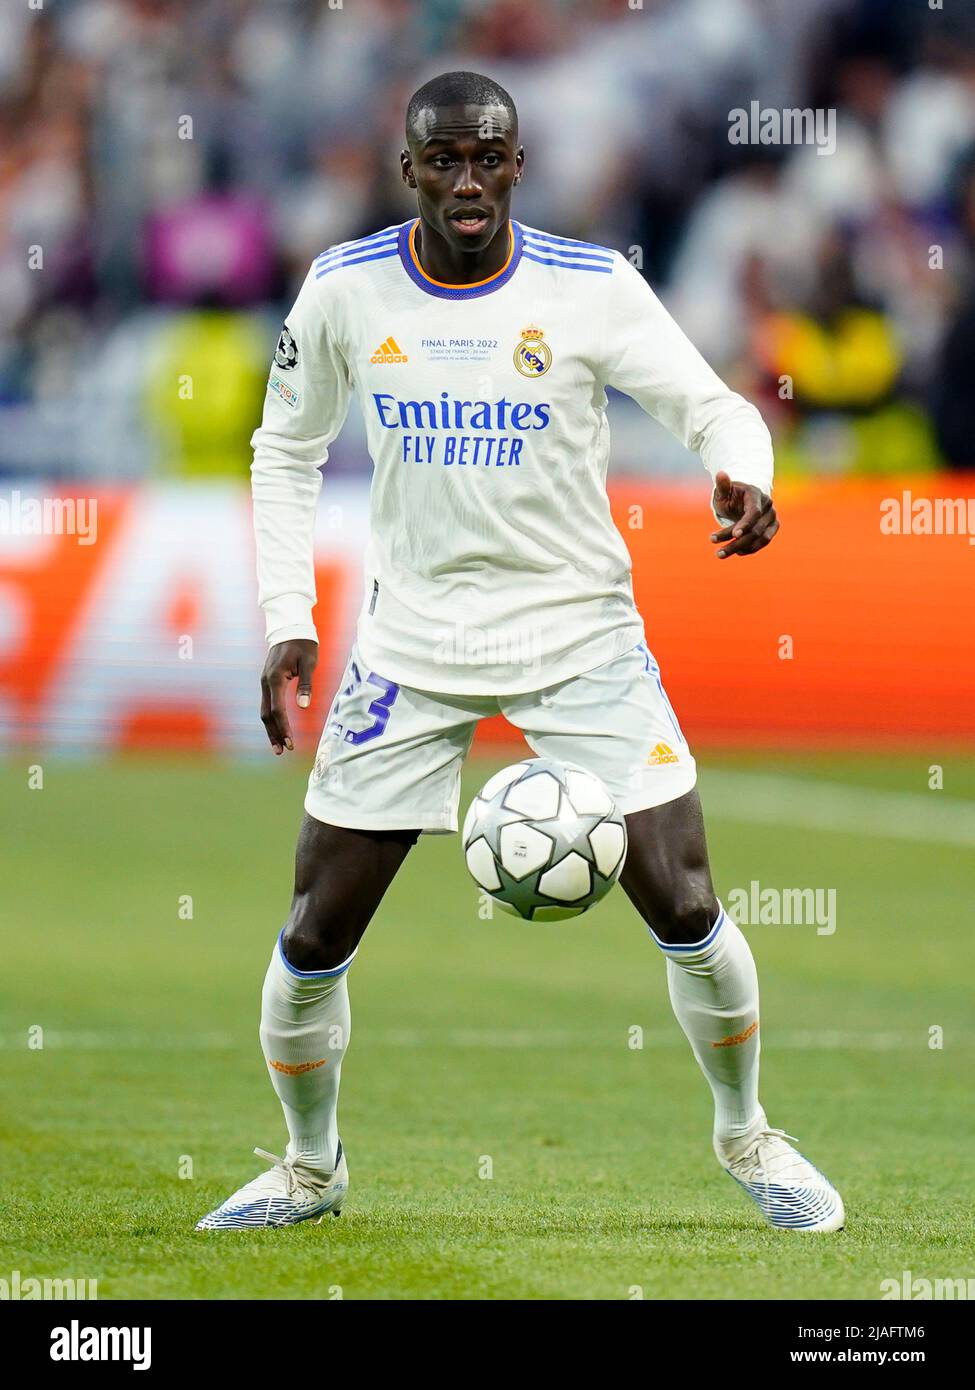 Ferland Mendy of Real Madrid during the UEFA Champions League Final match between Liverpool FC and Real Madrid played at Stade de France on May 28, 2022 in Paris, France. (Photo / Magma) Stock Photo